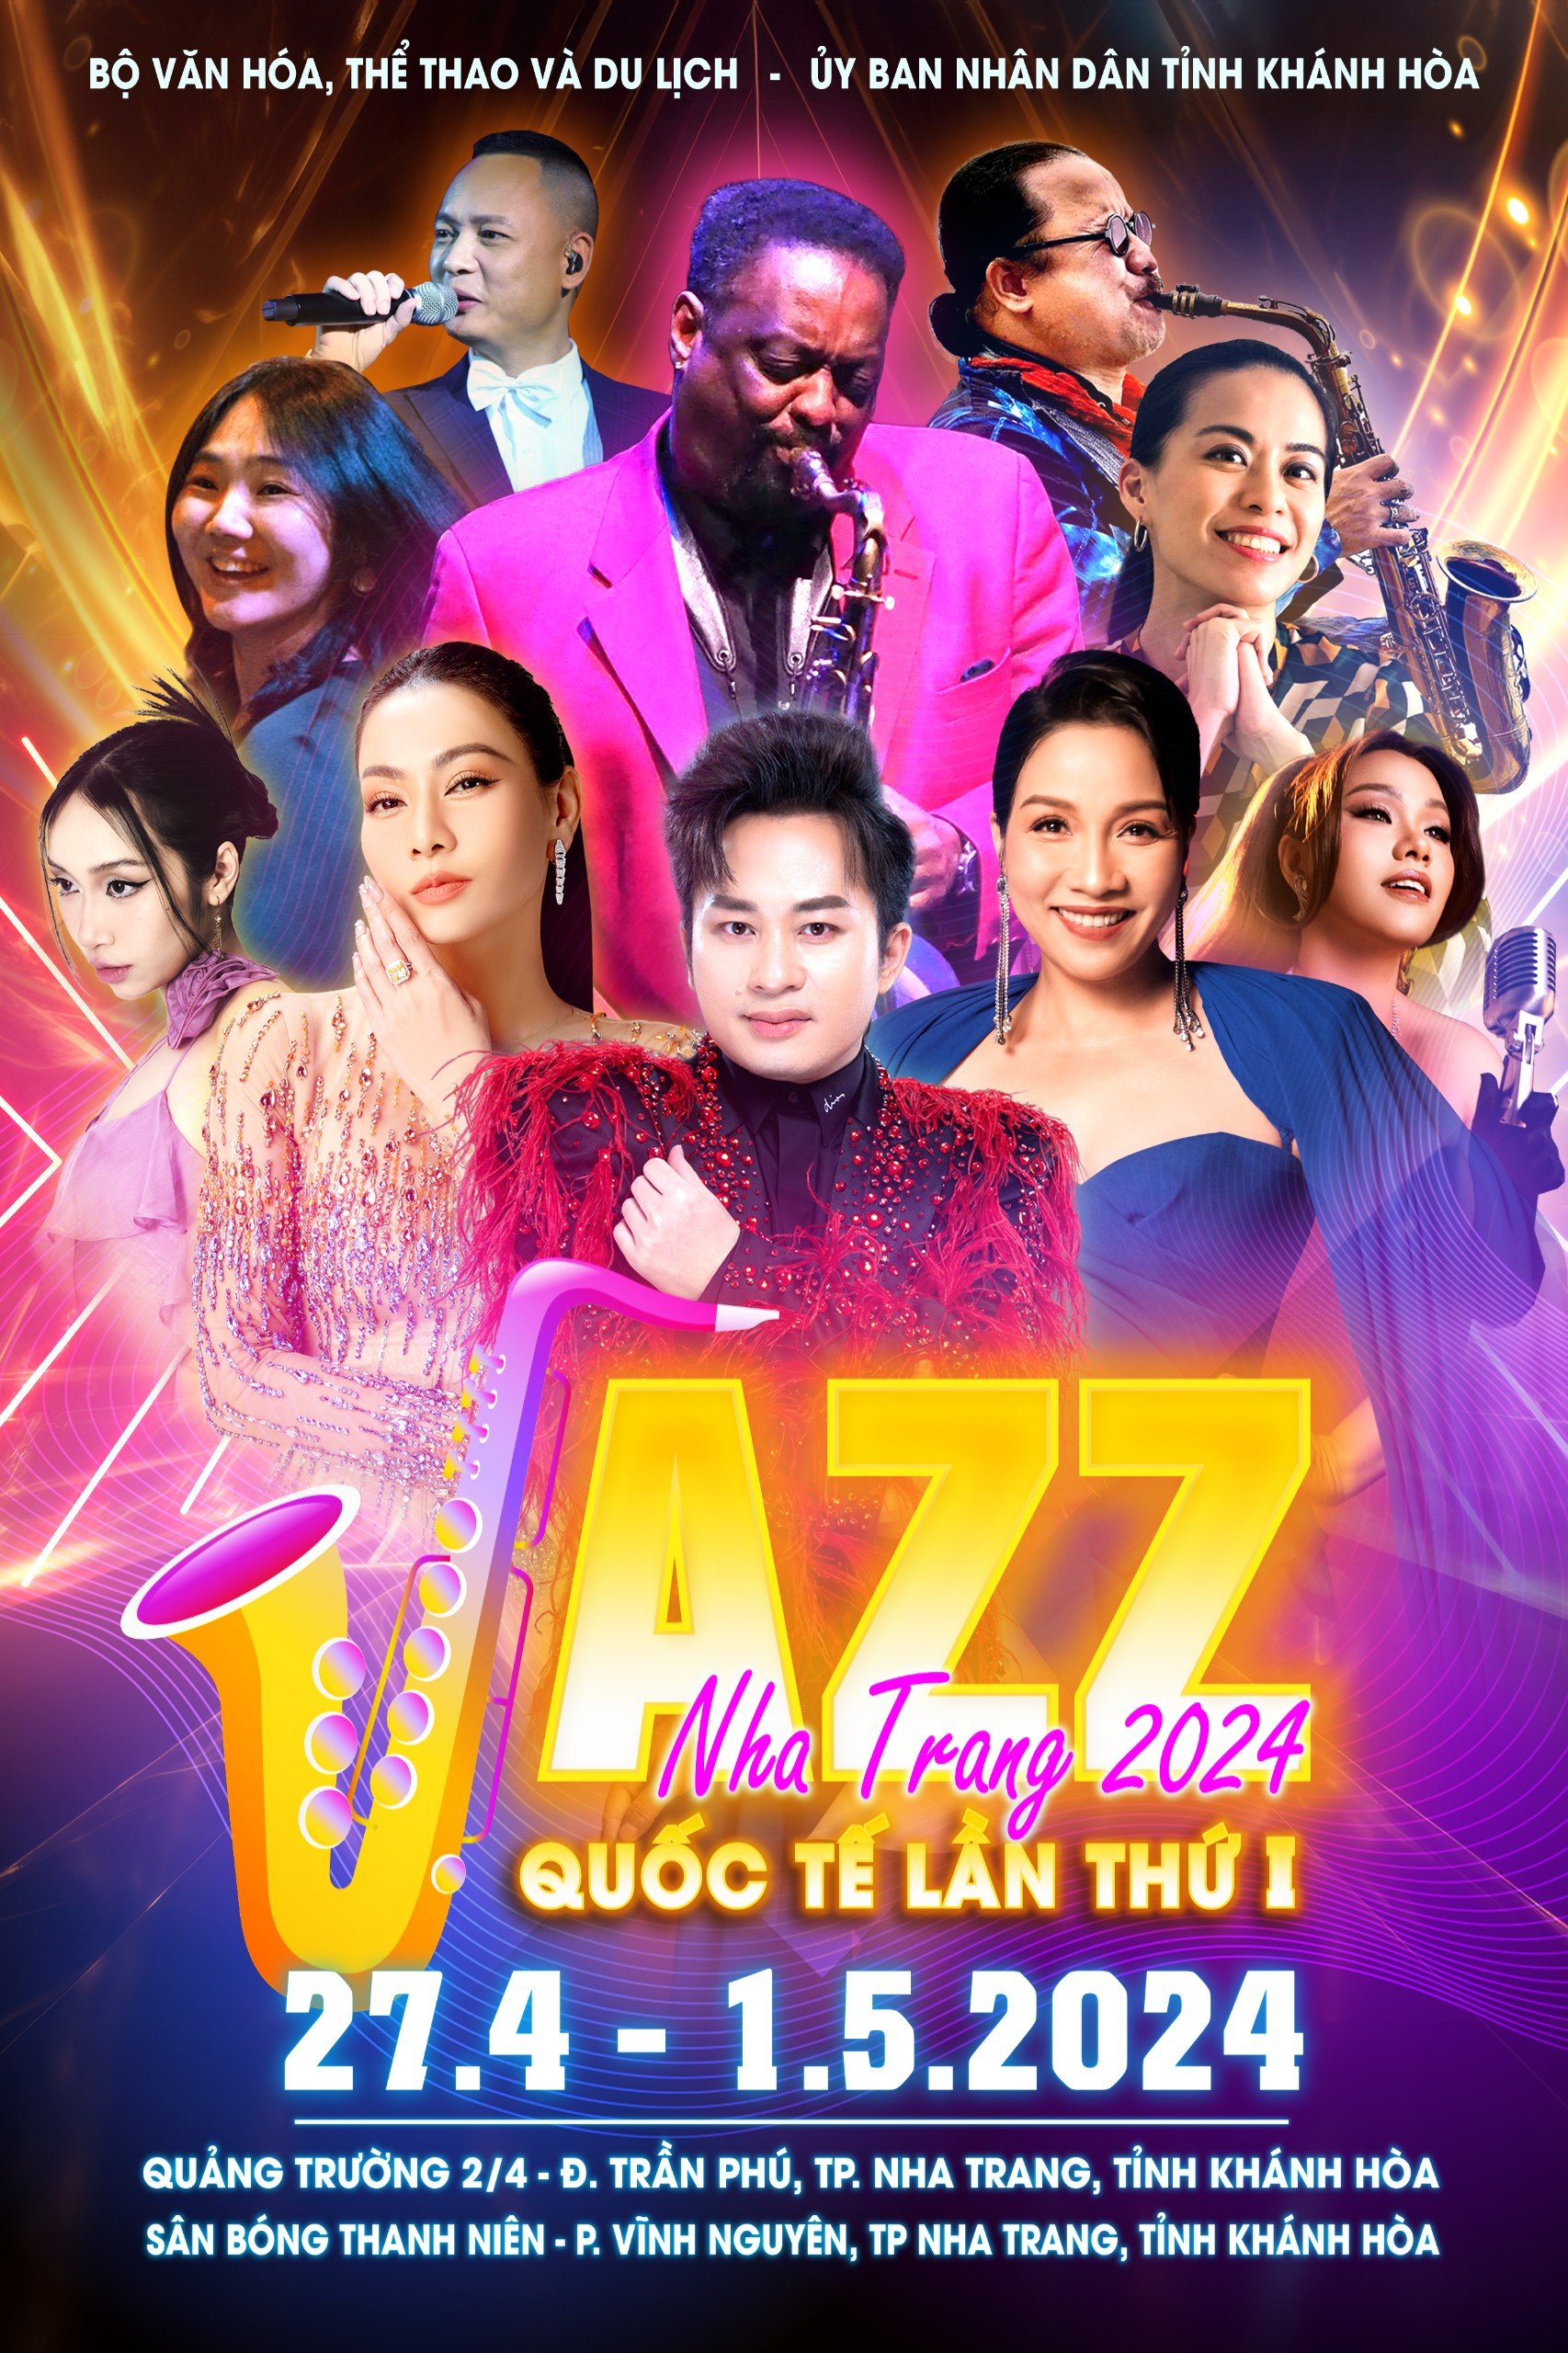 Poster of the international jazz festival (Source: Organization committee)

